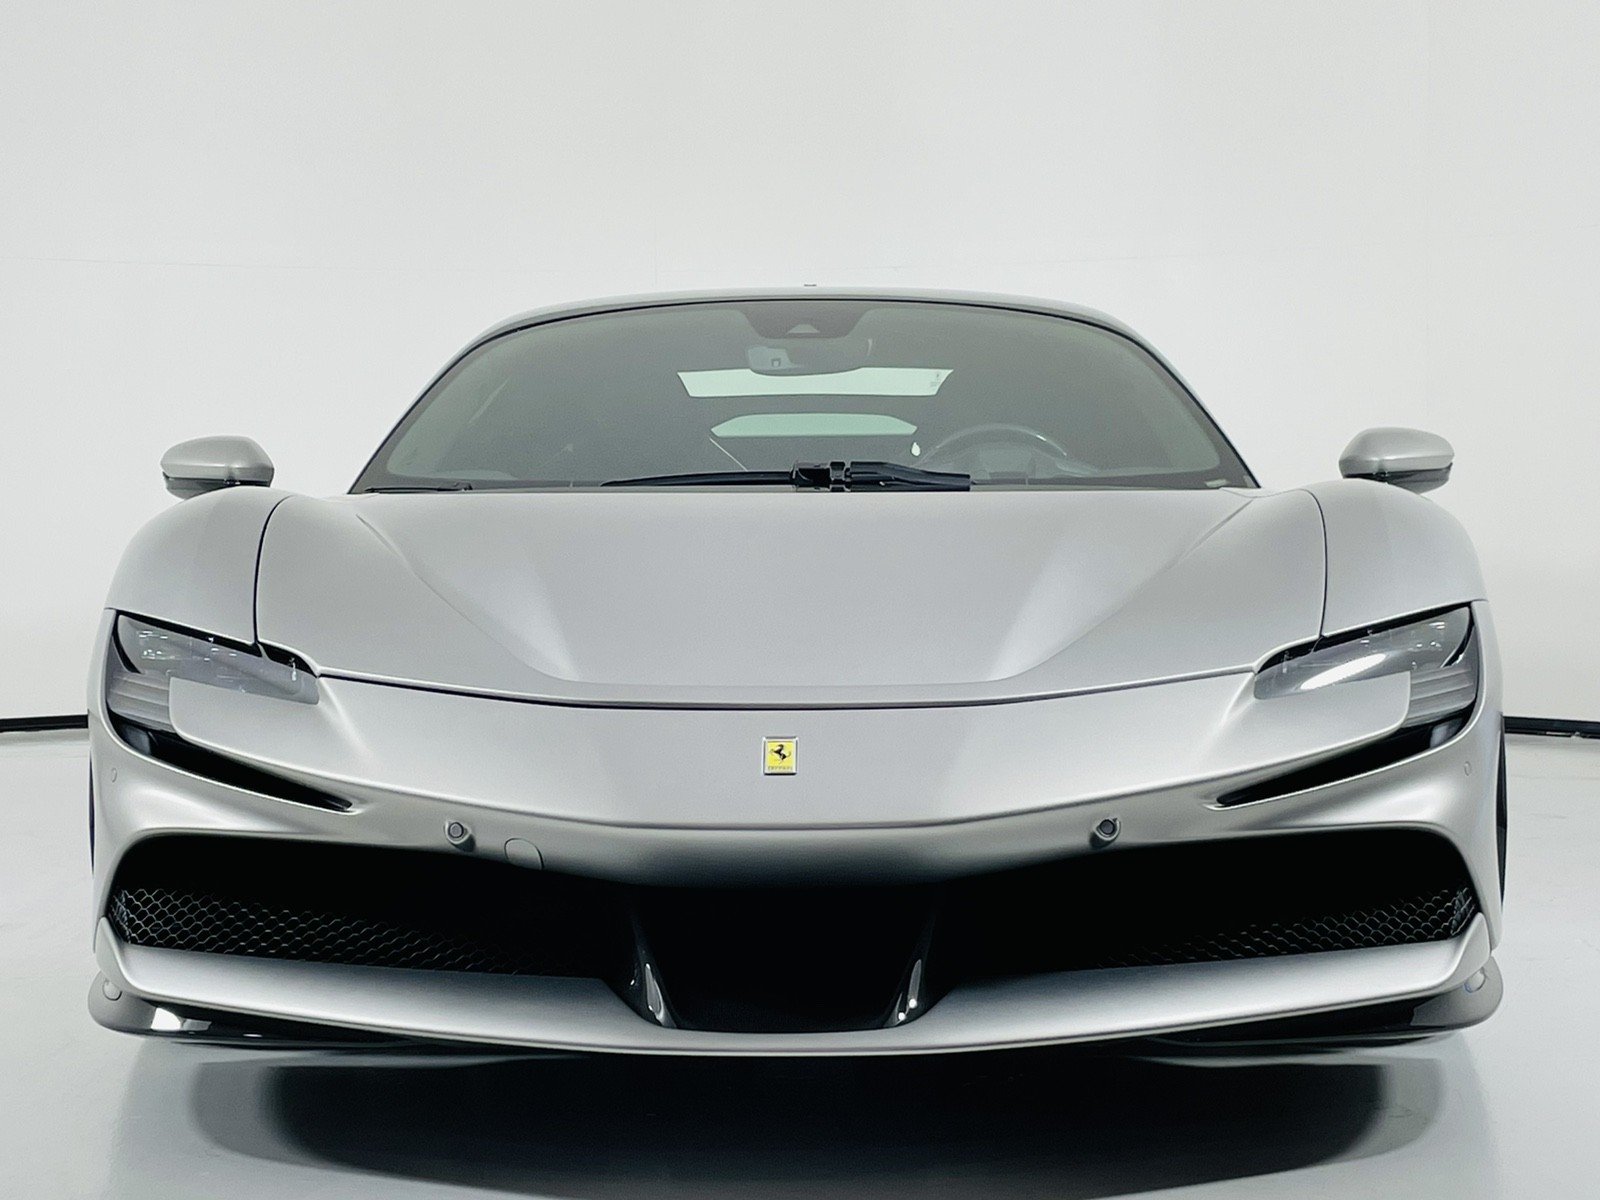 USED 2021 FERRARI SF90 STRADALE COUPE W A 650K MSRP FOR SALE (1)